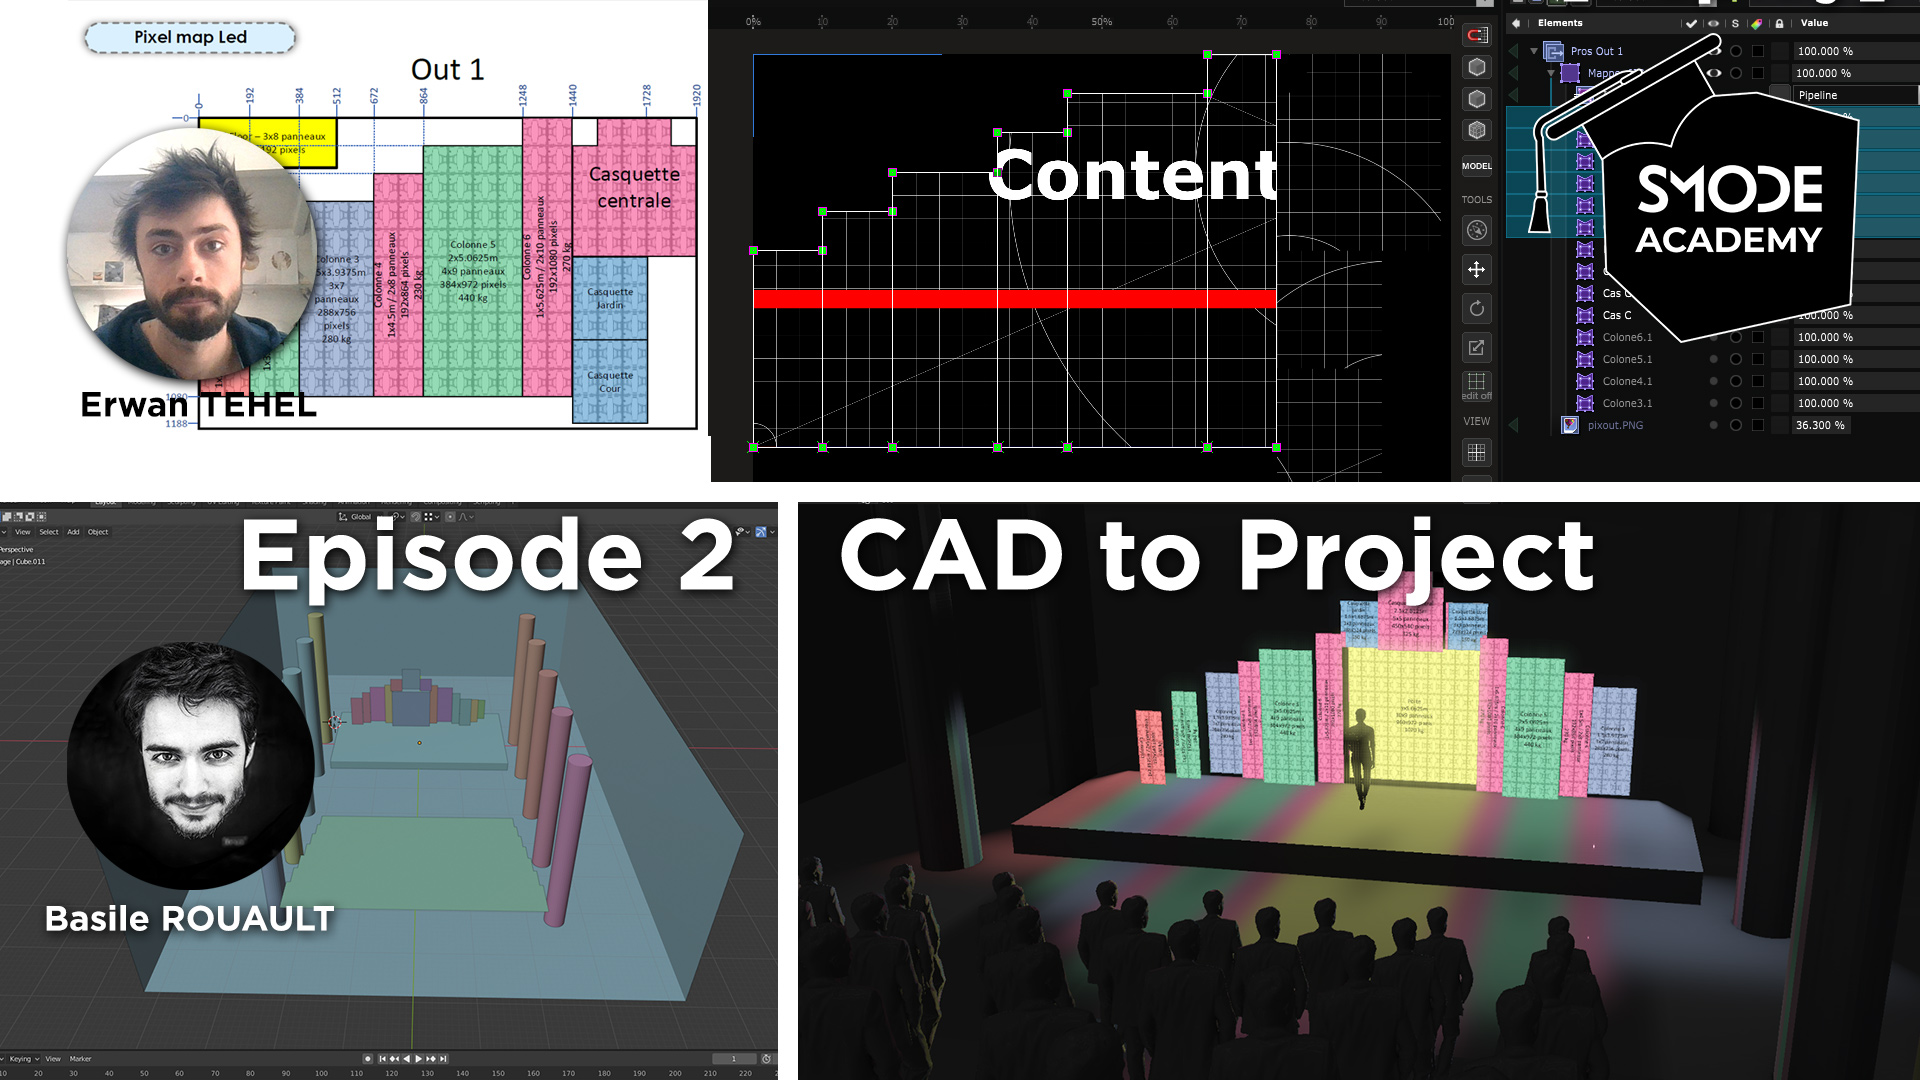 CAD To Project, Episode 2